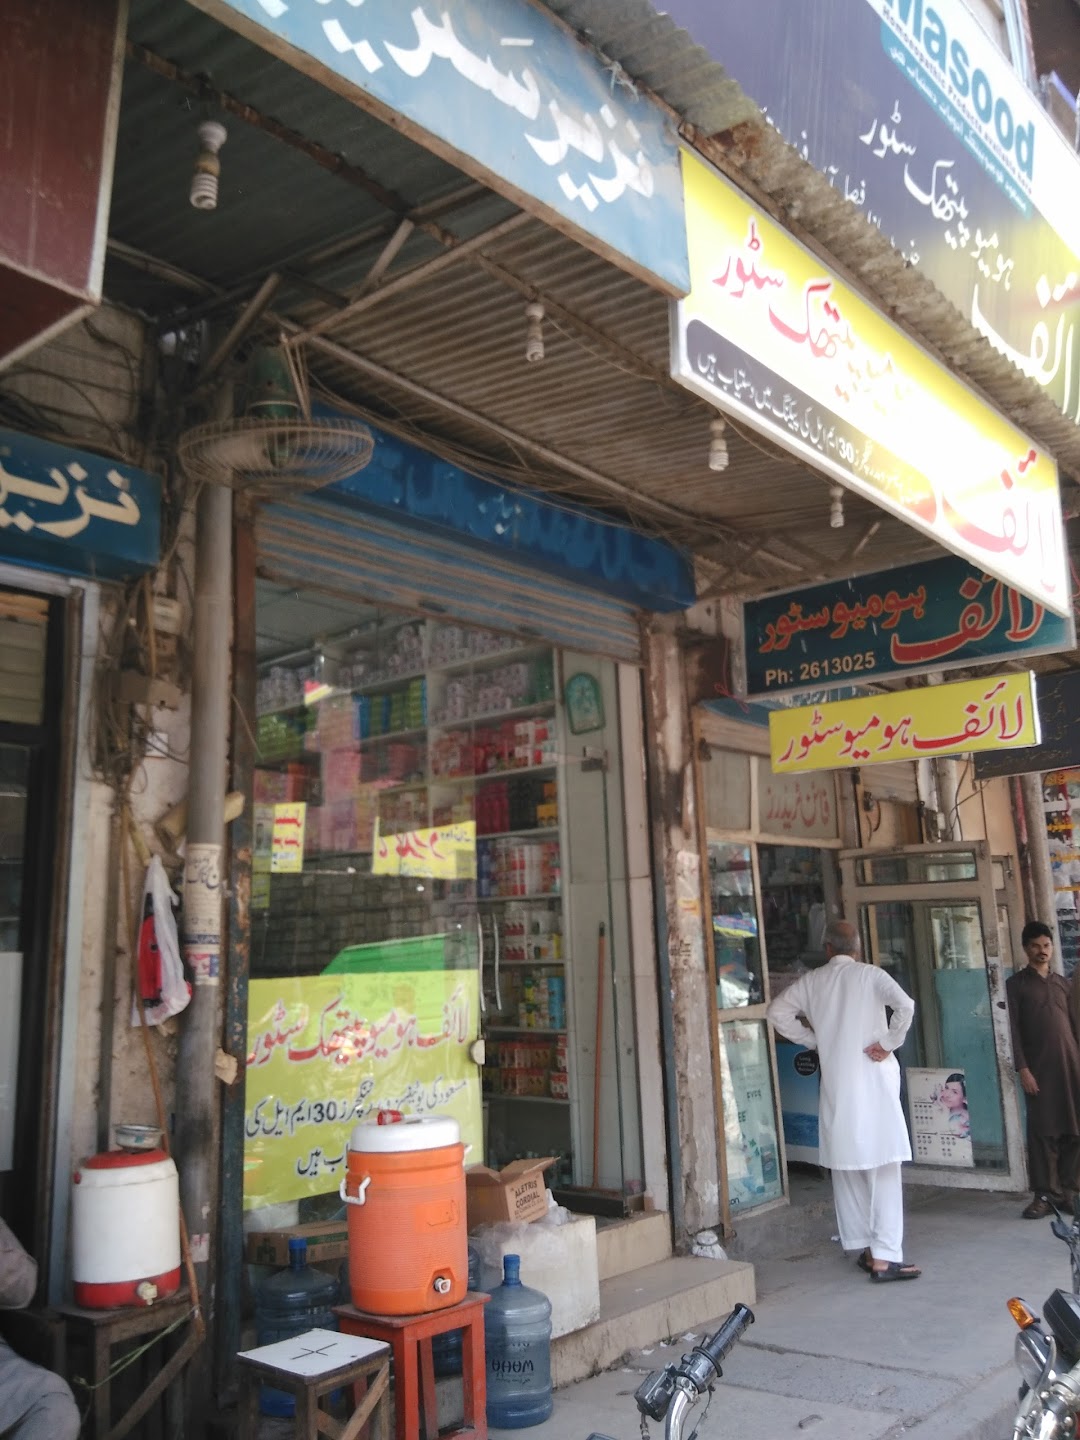 Life Homeopathic Store & Clinic